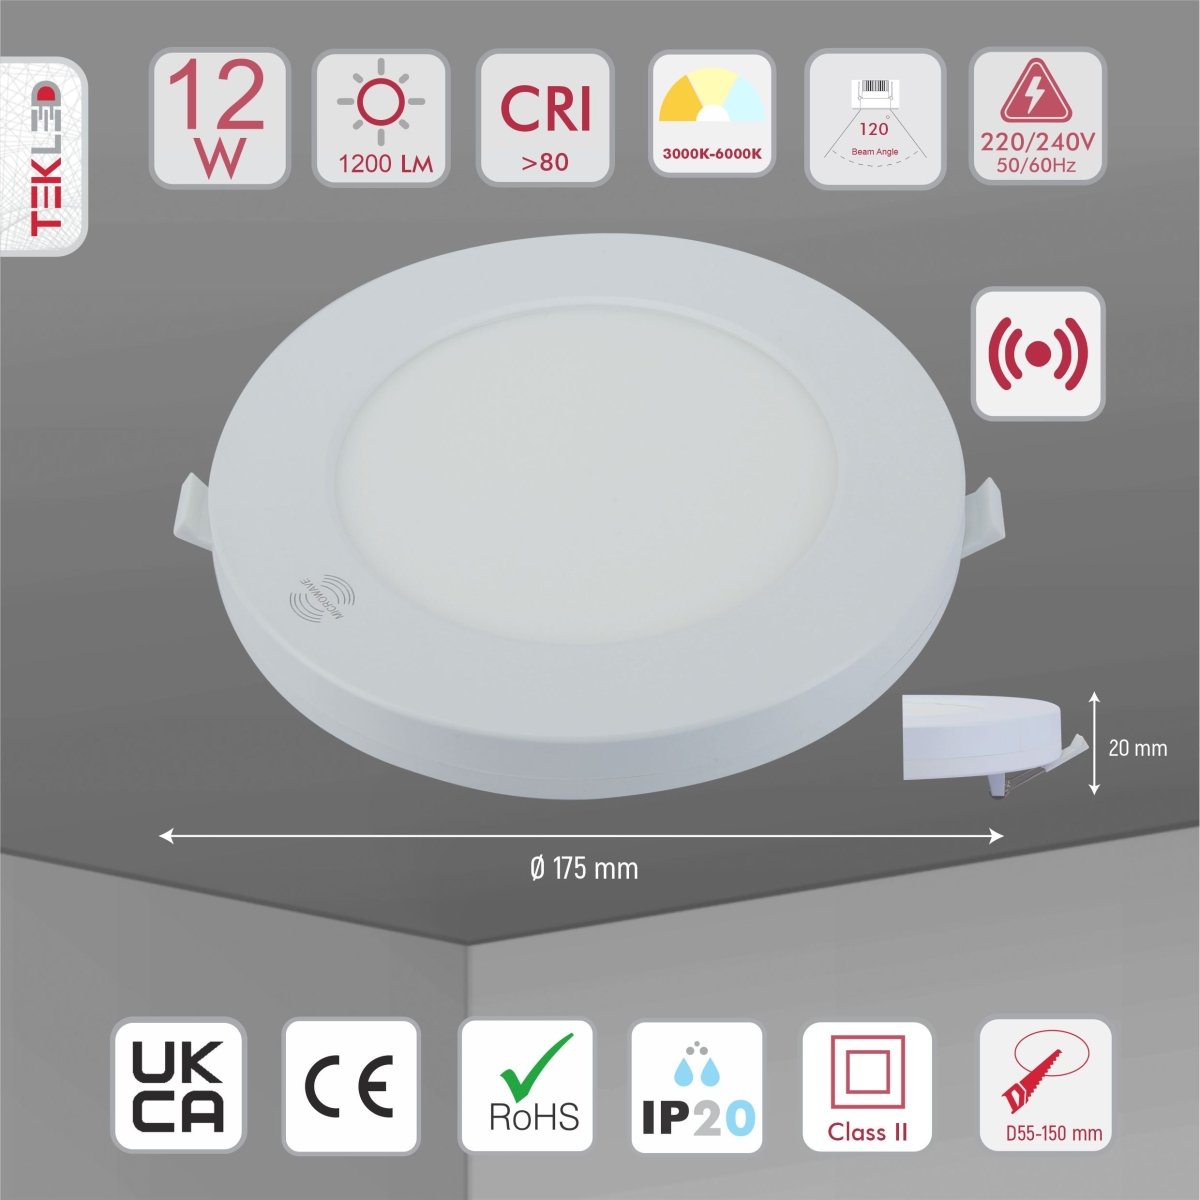 Product dimensions of universal downlight led round panel light 12w 3000-6000k warm white cool daylight